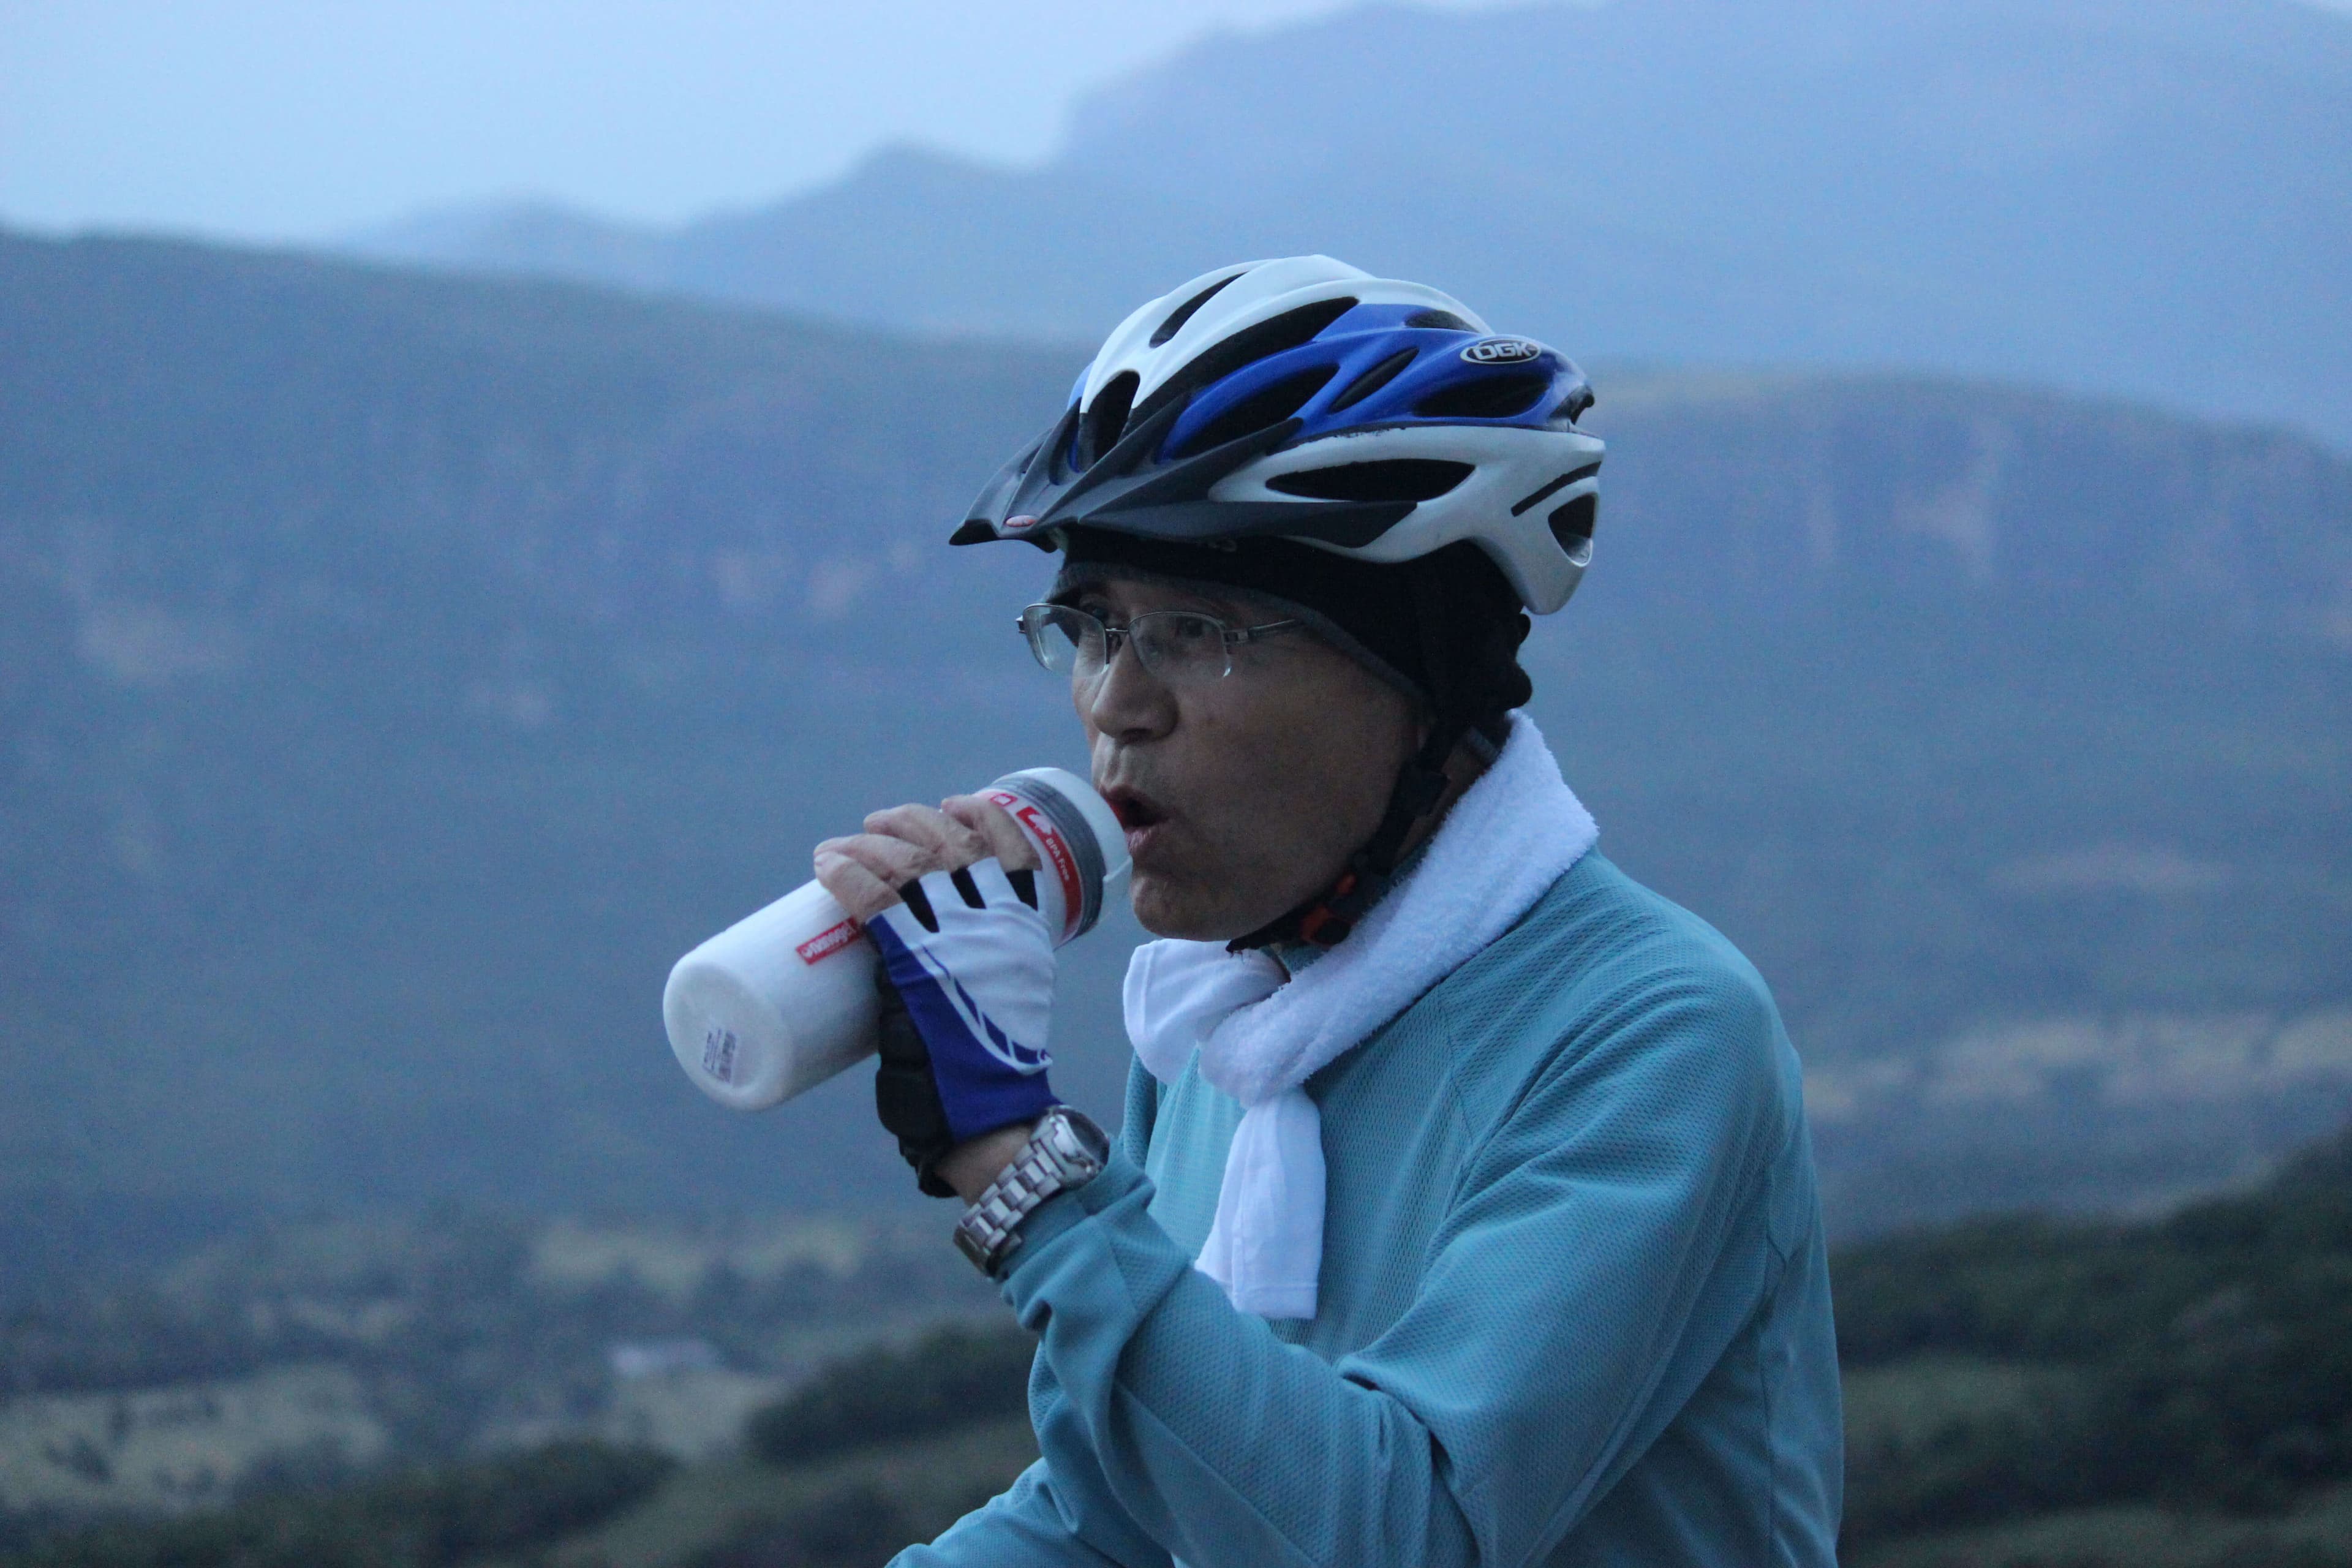 A tourist take a break and refreshment while Meemure Cycling Tour